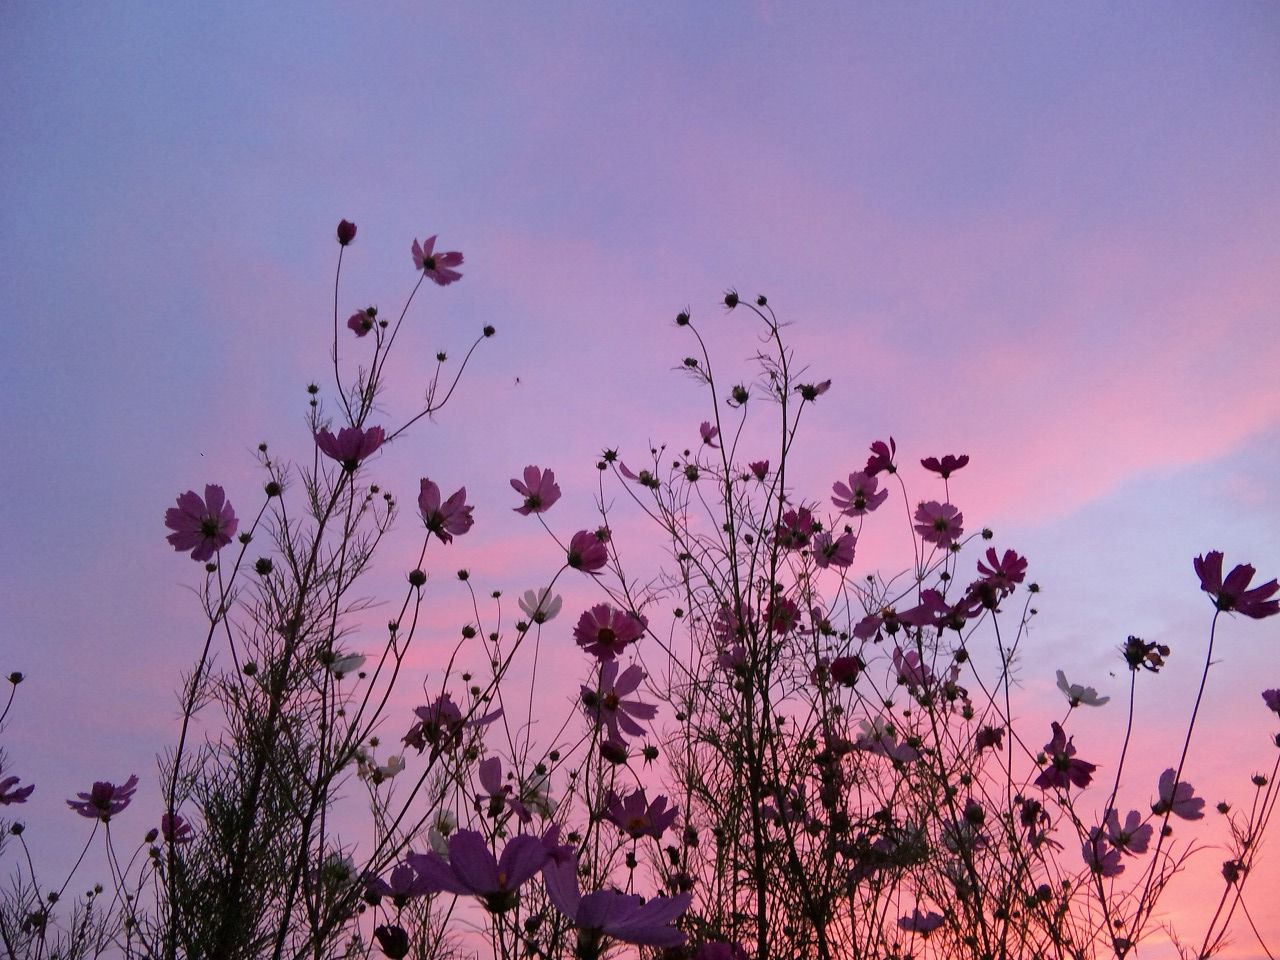 A field of purple flowers with a pink and purple sky in the background - Flower